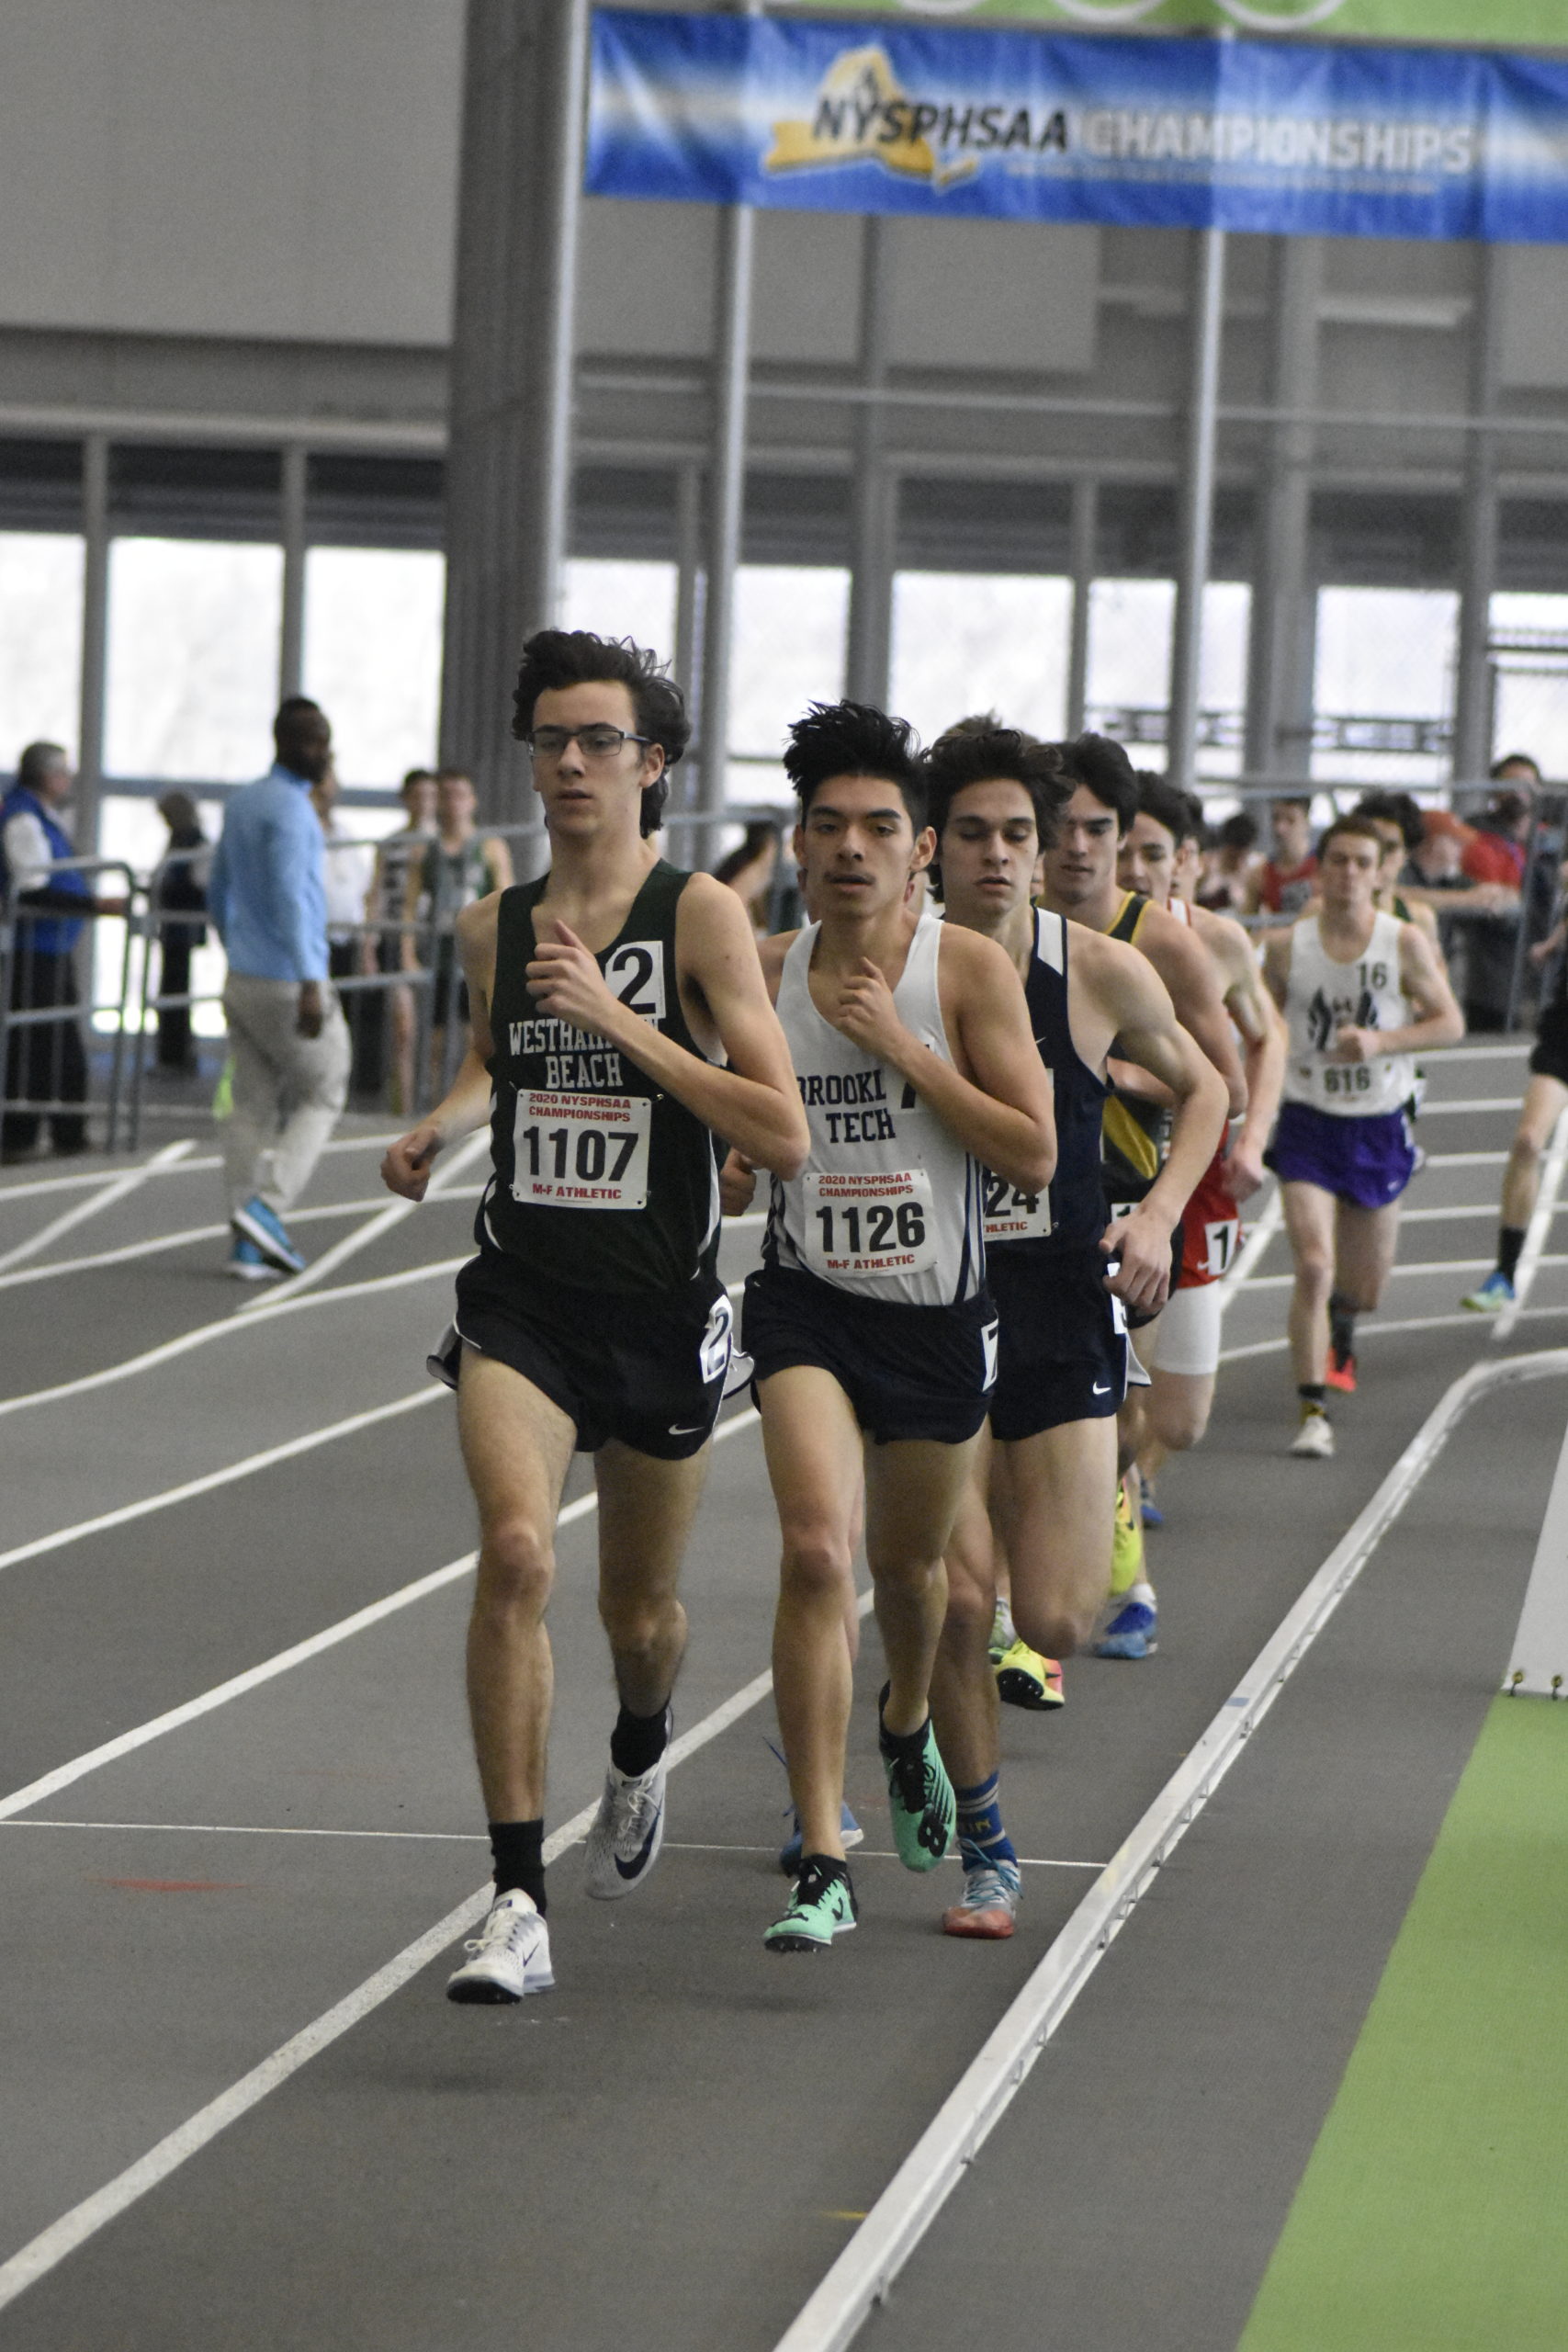 Westhampton Beach sophomore Gavin Ehlers is set to begin the 3,200-meter race at the New York State Indoor Track and Field Championships on Saturday.